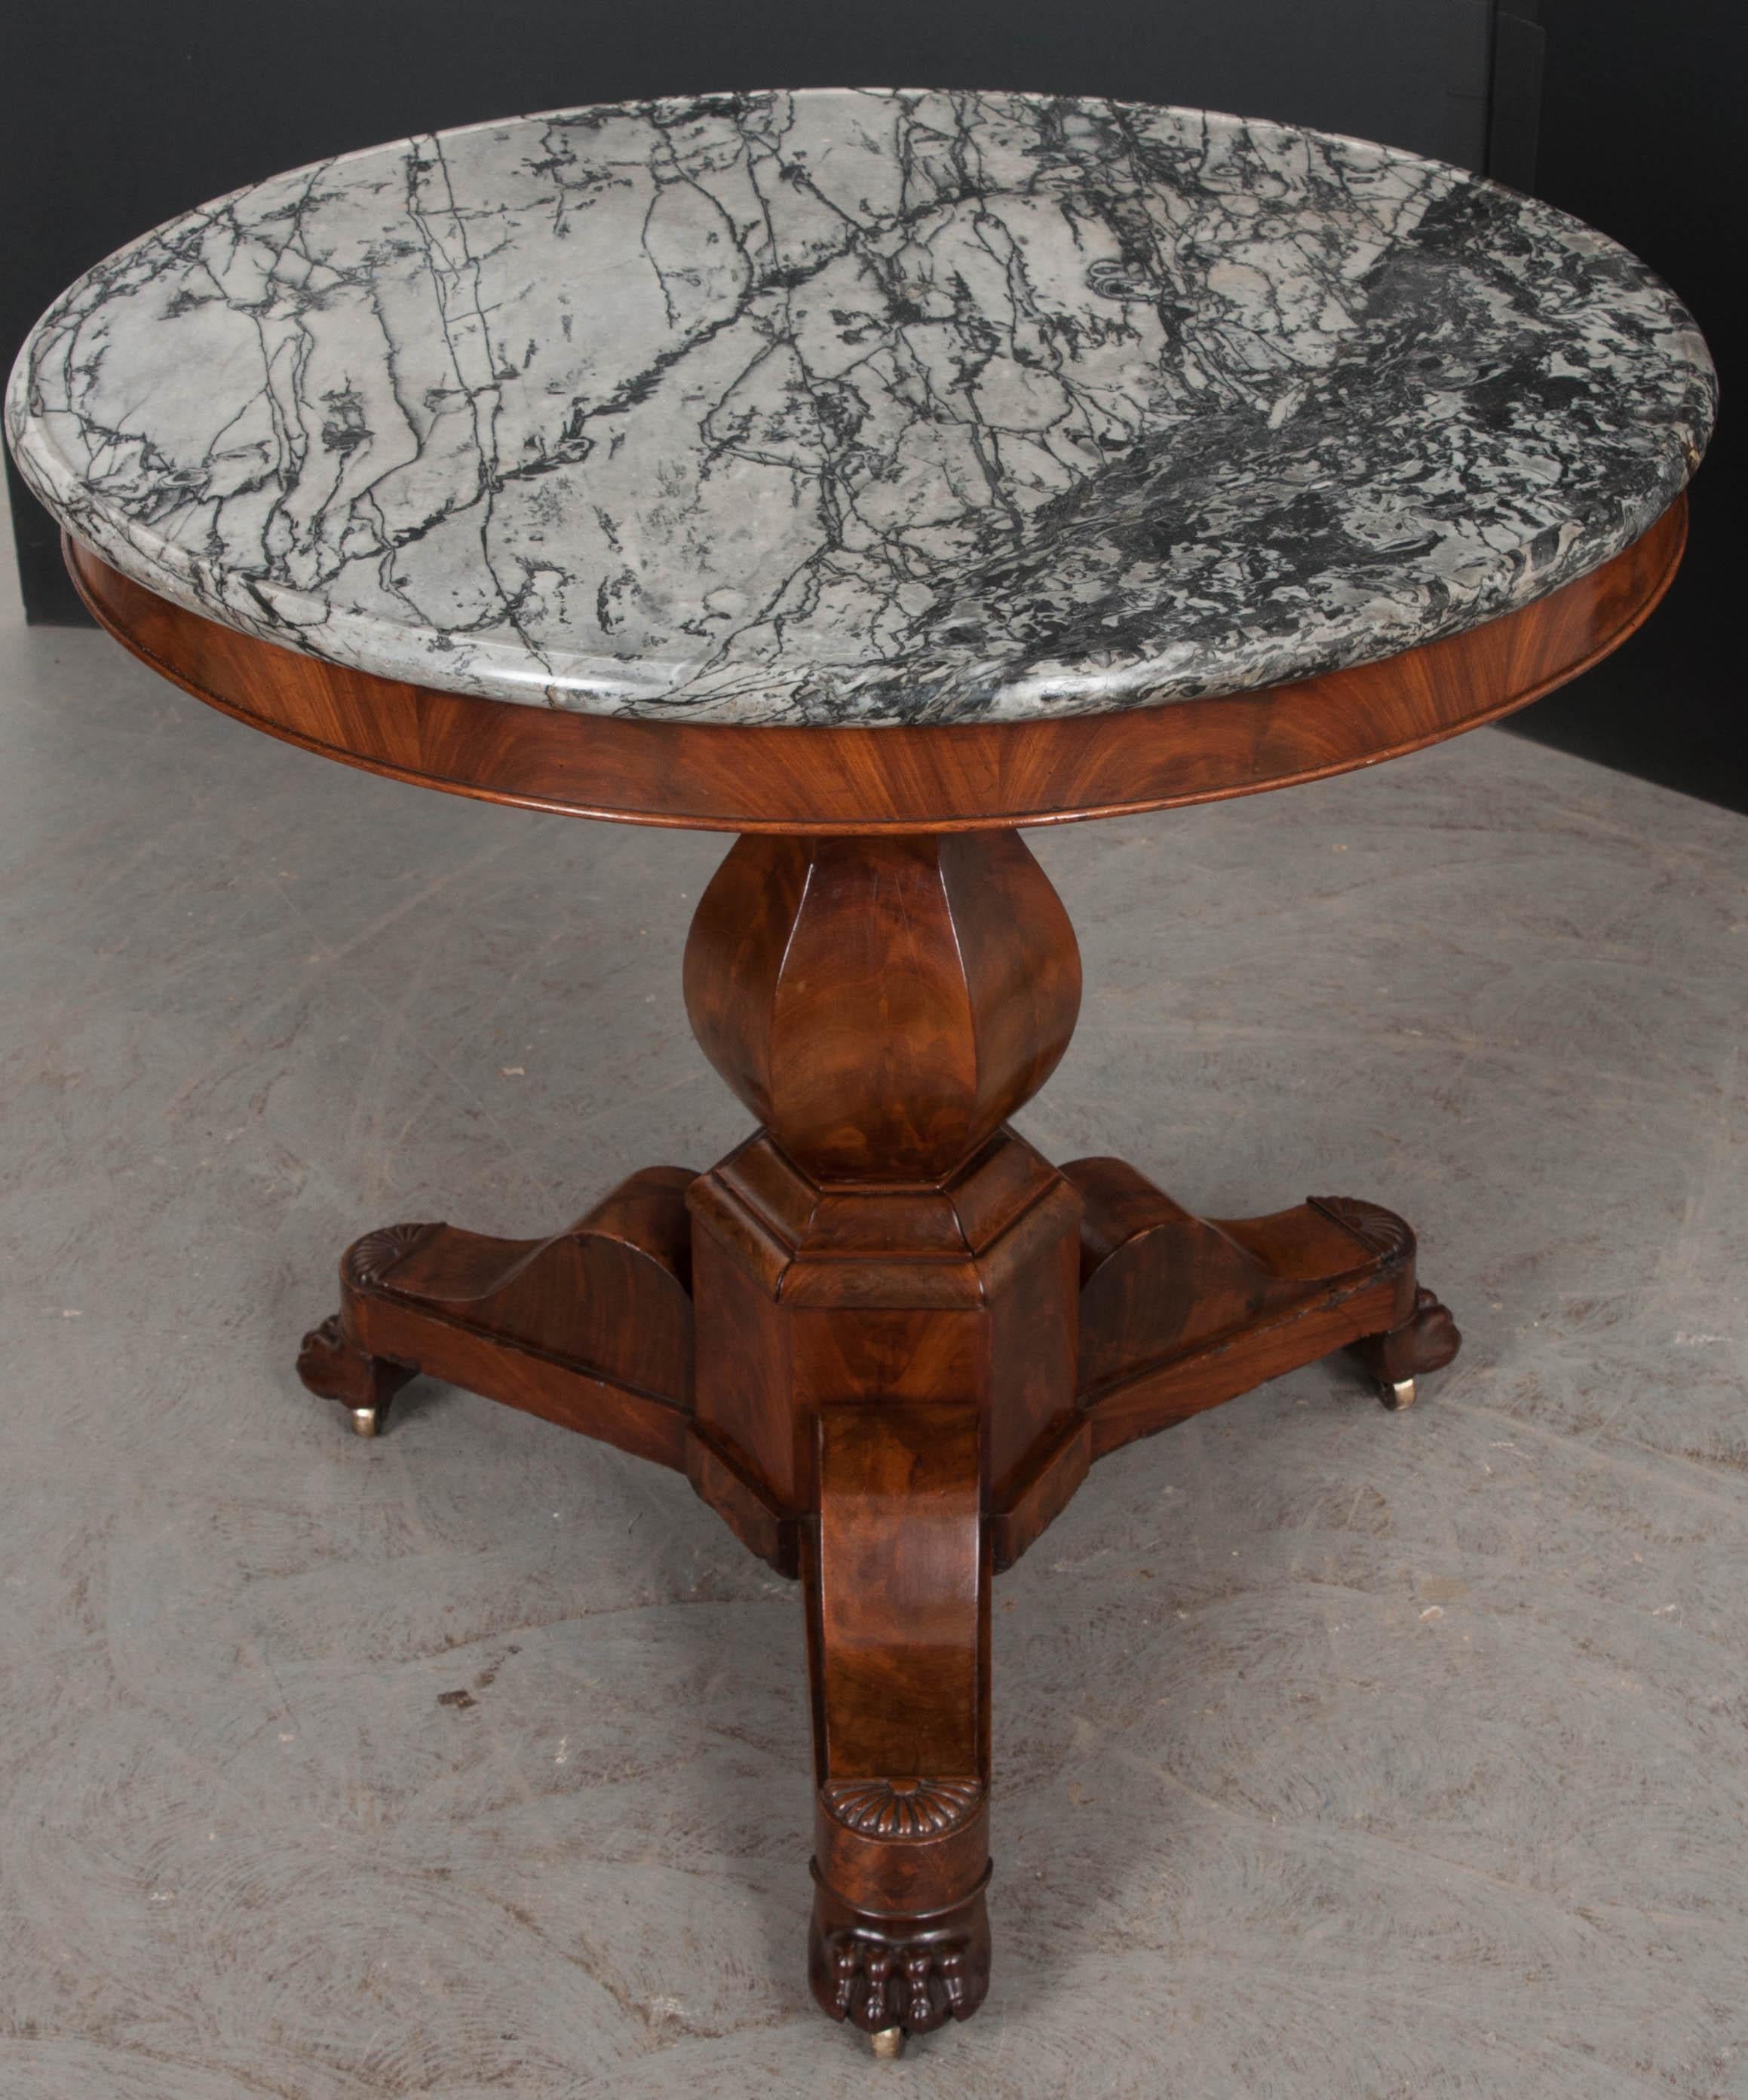 French Restauration mahogany center table, circa 1815-1830, with original dished grey-and-white marble top and beautifully veneered apron, above a hexagonal vasiform standard, and resting on a hexagonal plinth and tripodal base with well-carved claw